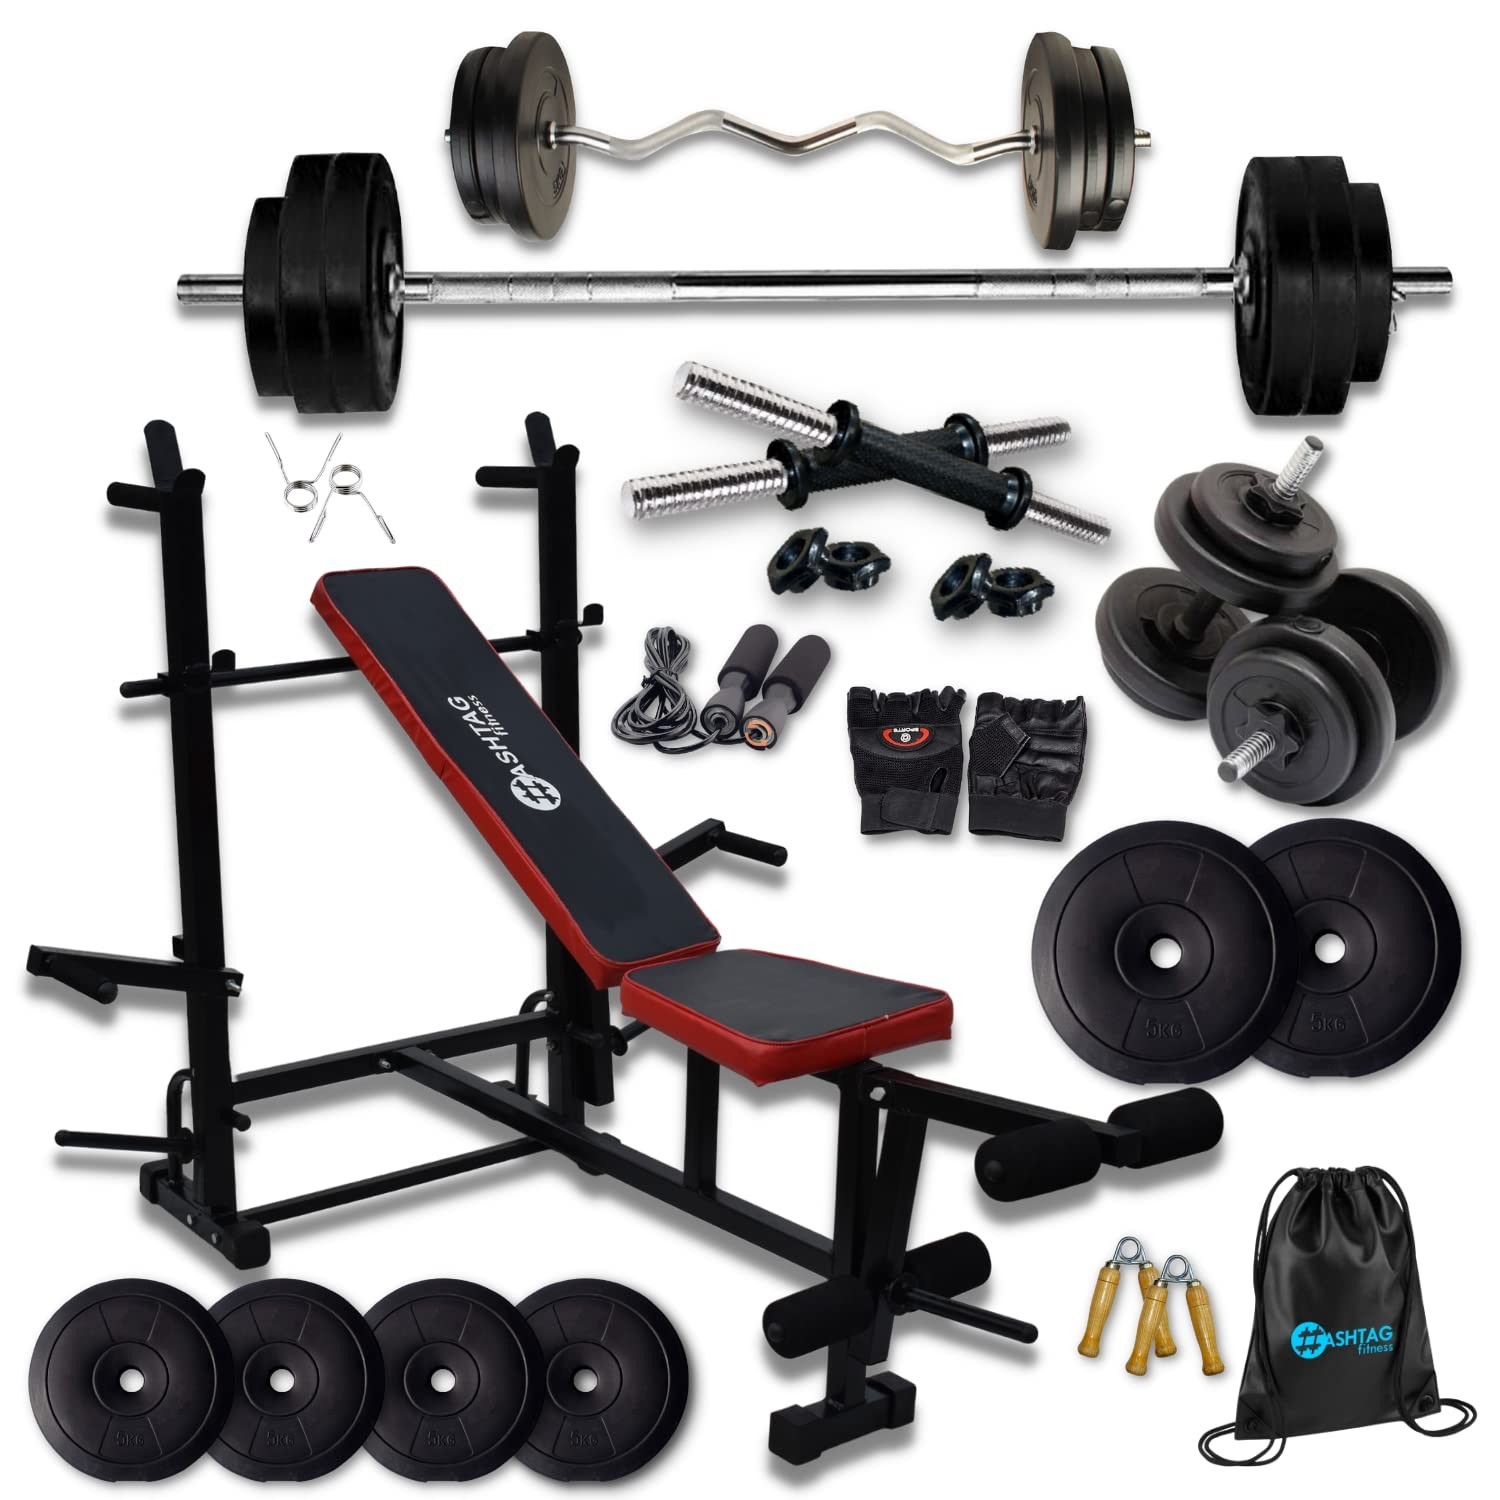 Best GYM Equipment Brand in India | Energie Fitness